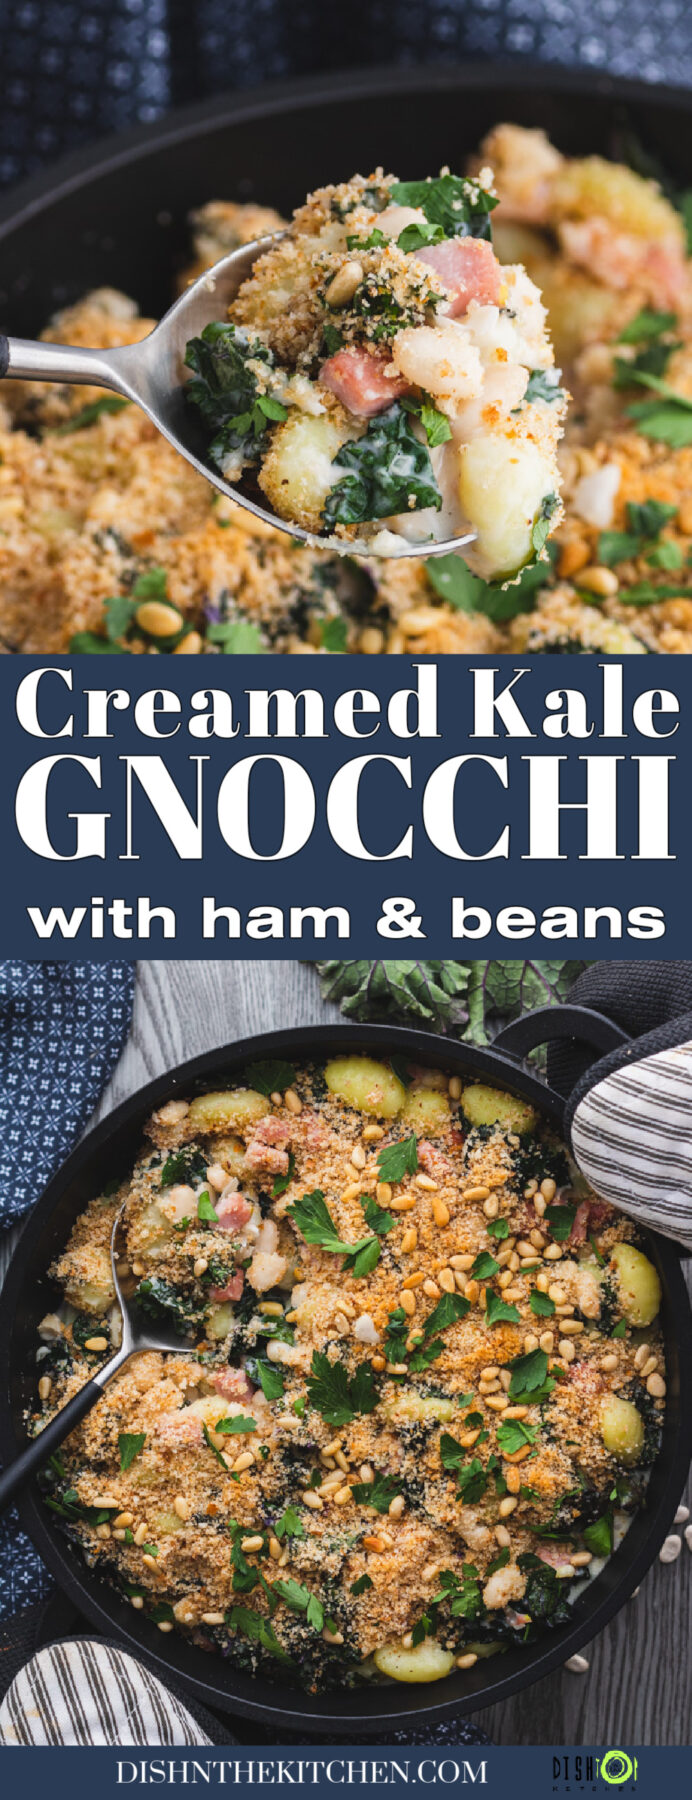 Pinterest image of a baking dish full of Creamed Kale Gnocchi full of ham and beans in a creamy sauce topped with golden breadcrumbs and pine nuts.